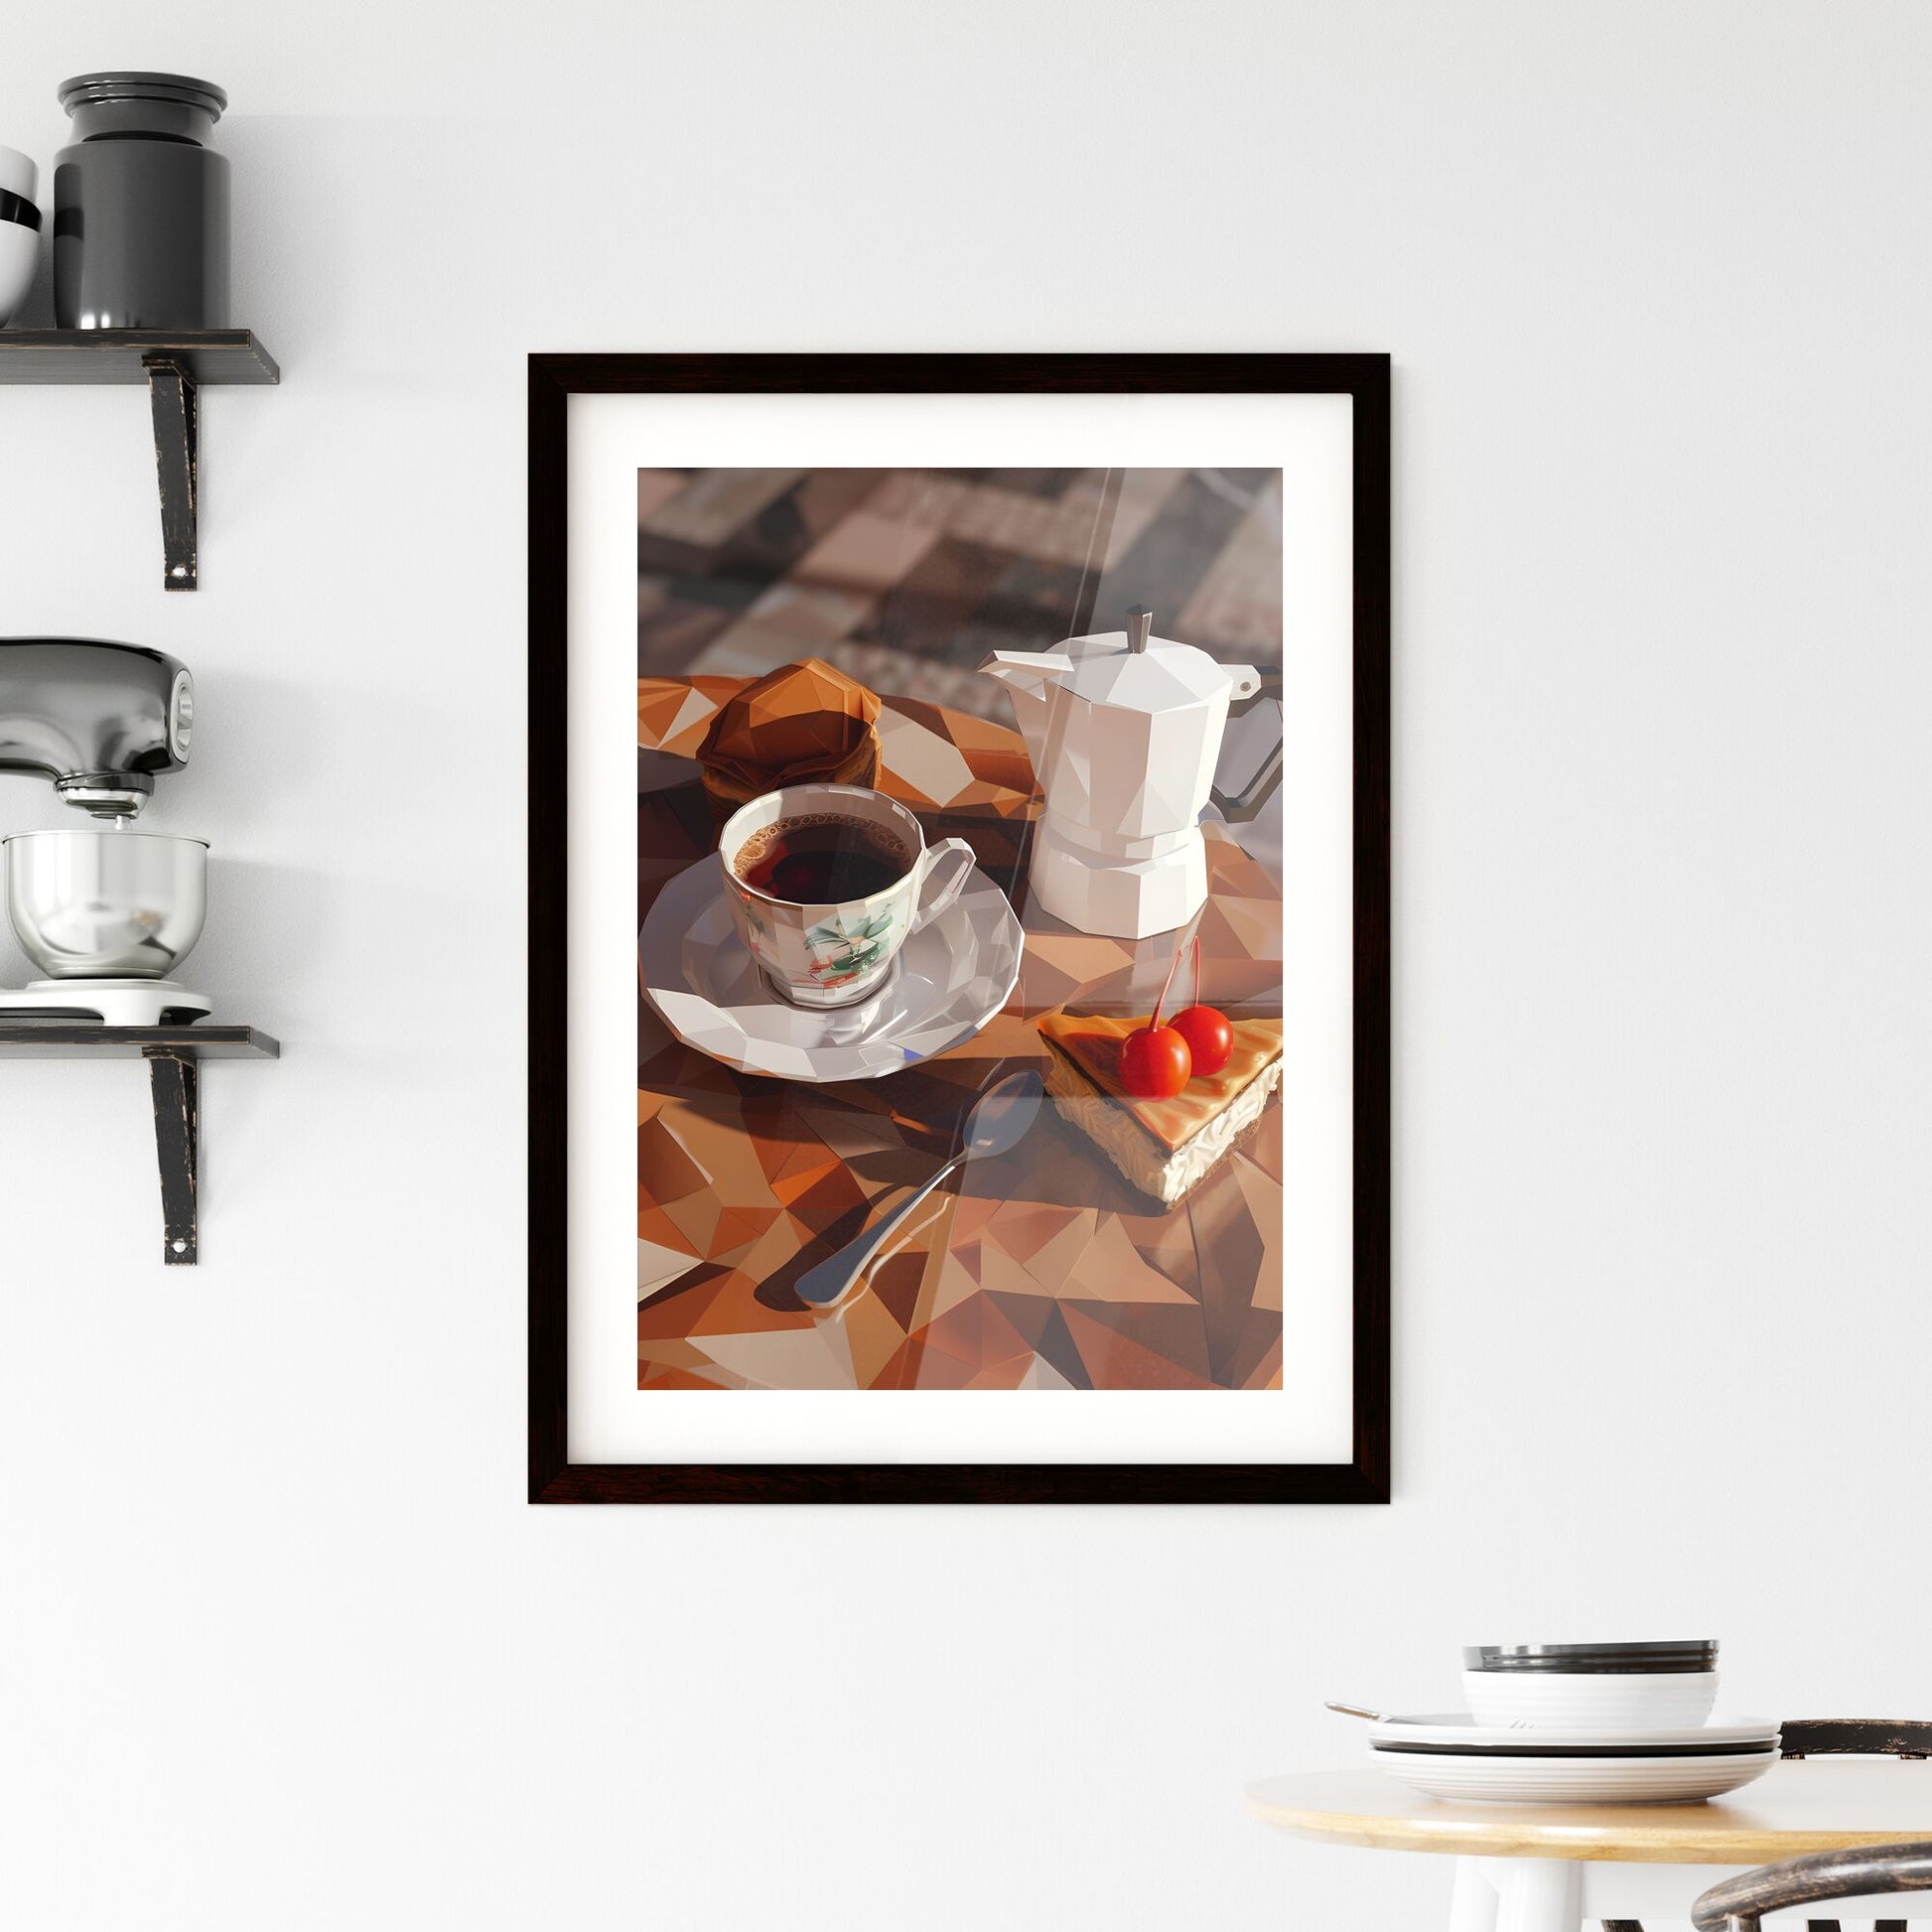 Low poly 3D model of a Moka Pot, coffee, and cheesecake on a table in origami style, cubism, studio lighting, UHD, 16K Default Title